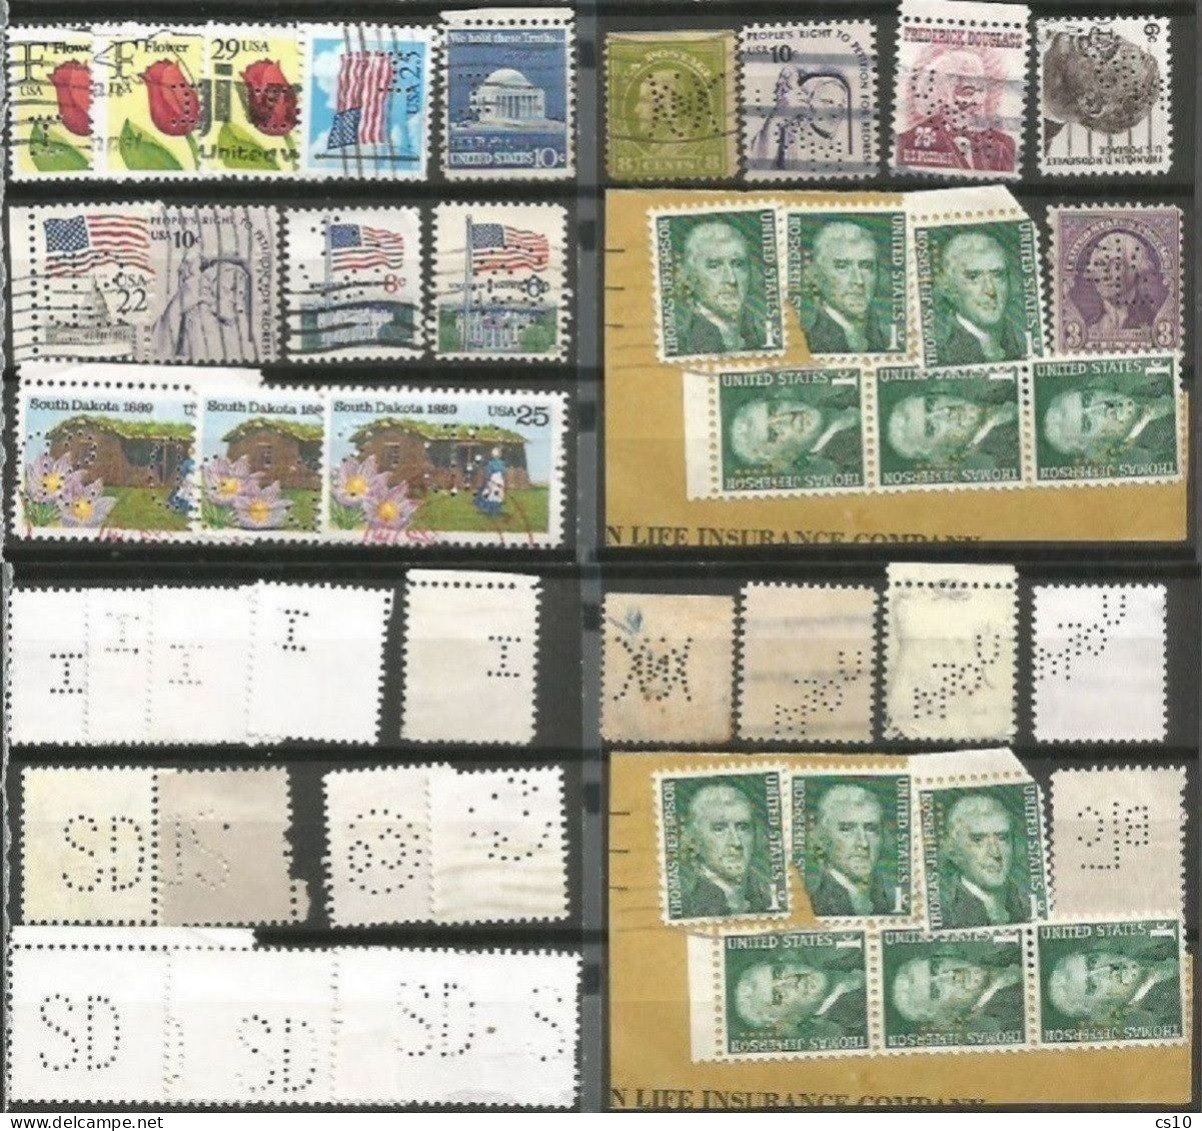 USA Perfins Small lot of 130 pcs 7 scans incl. PPC Iowa University and some Piece incl. Stationery7